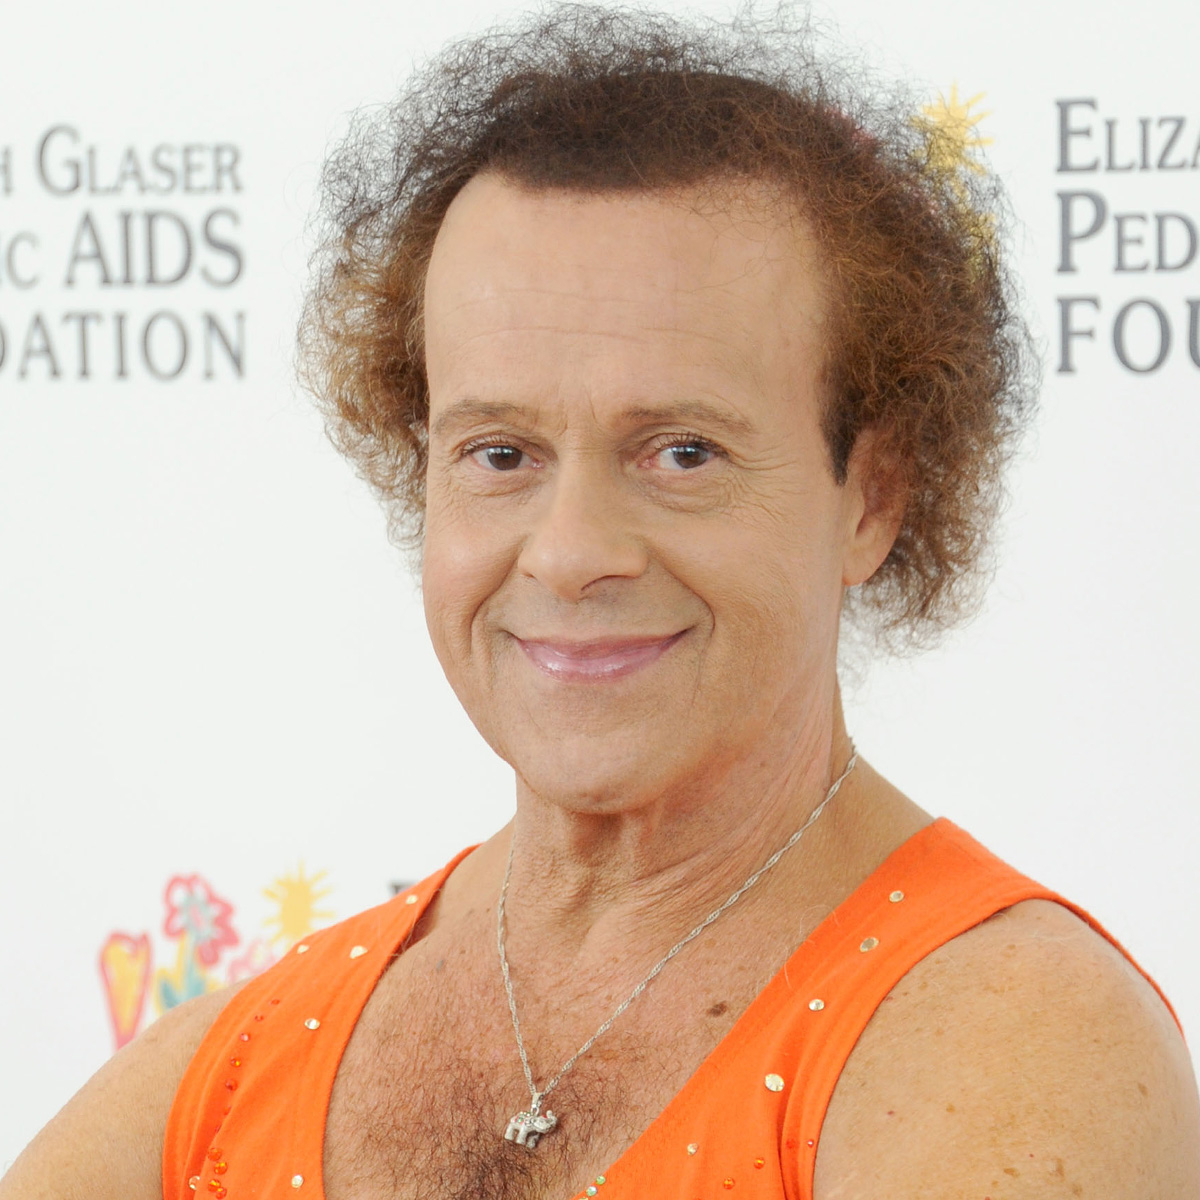 Richard Simmons’ Staff Reveals His Final Message Before His Death